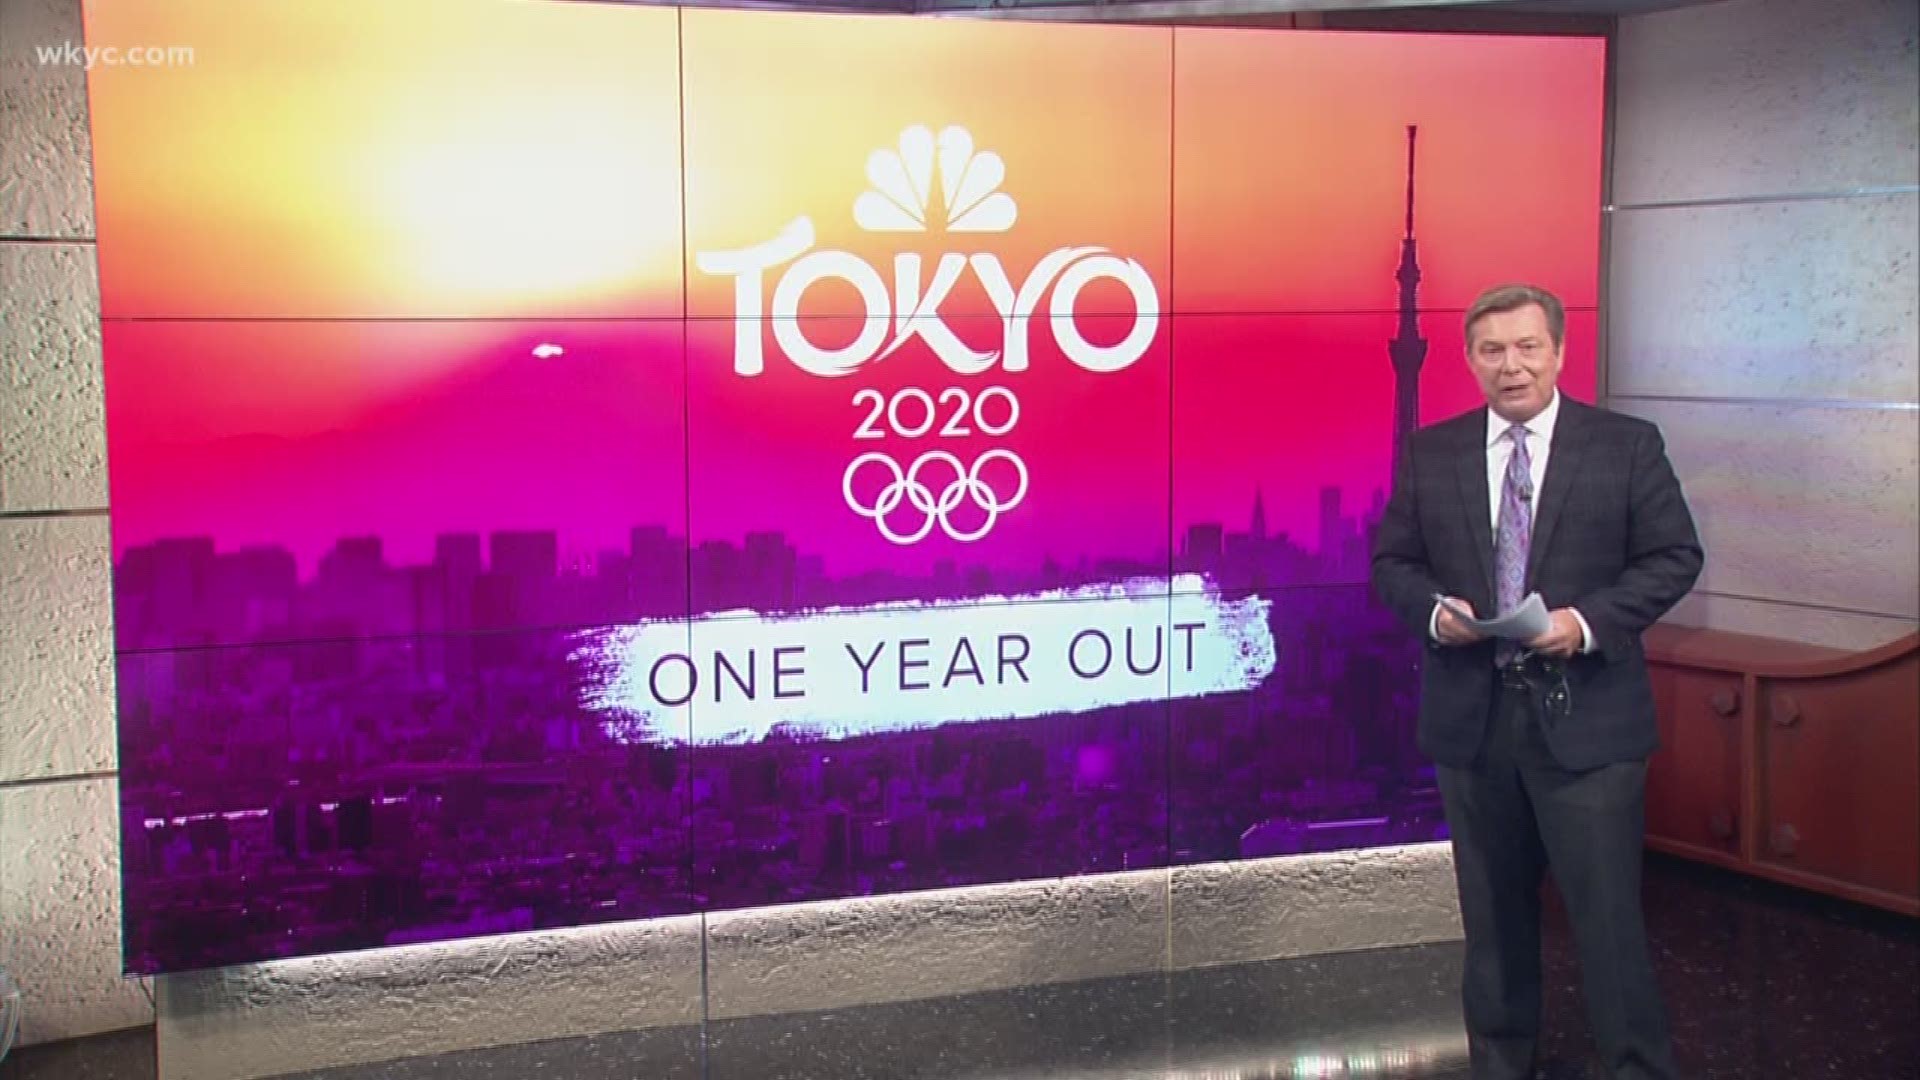 It's not too early to start thinking about the Olympics. Jim Donovan has an early look at what we'll see next year in Tokyo.